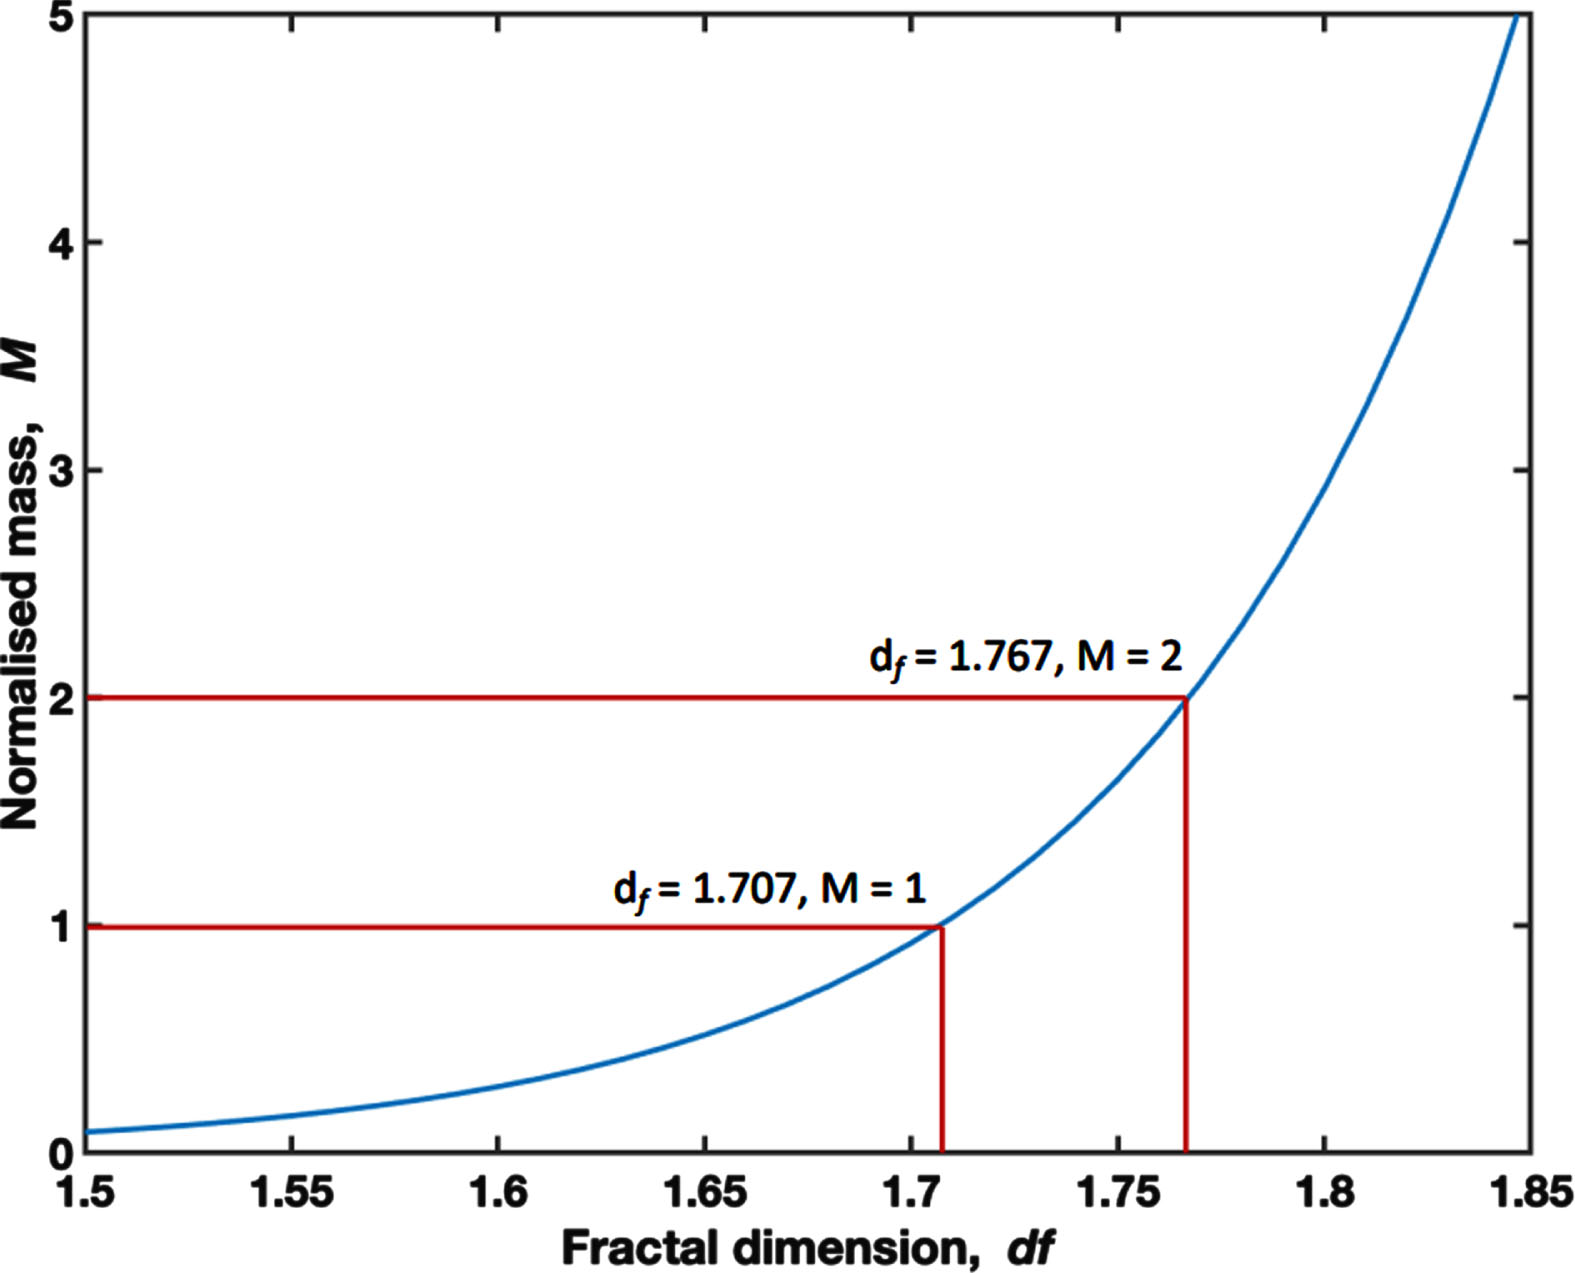 A graph displaying the relationship between df and the Normalised Mass, where a Normalised Mass of 1.00 is set at the mean df for the study cohort (1.707).